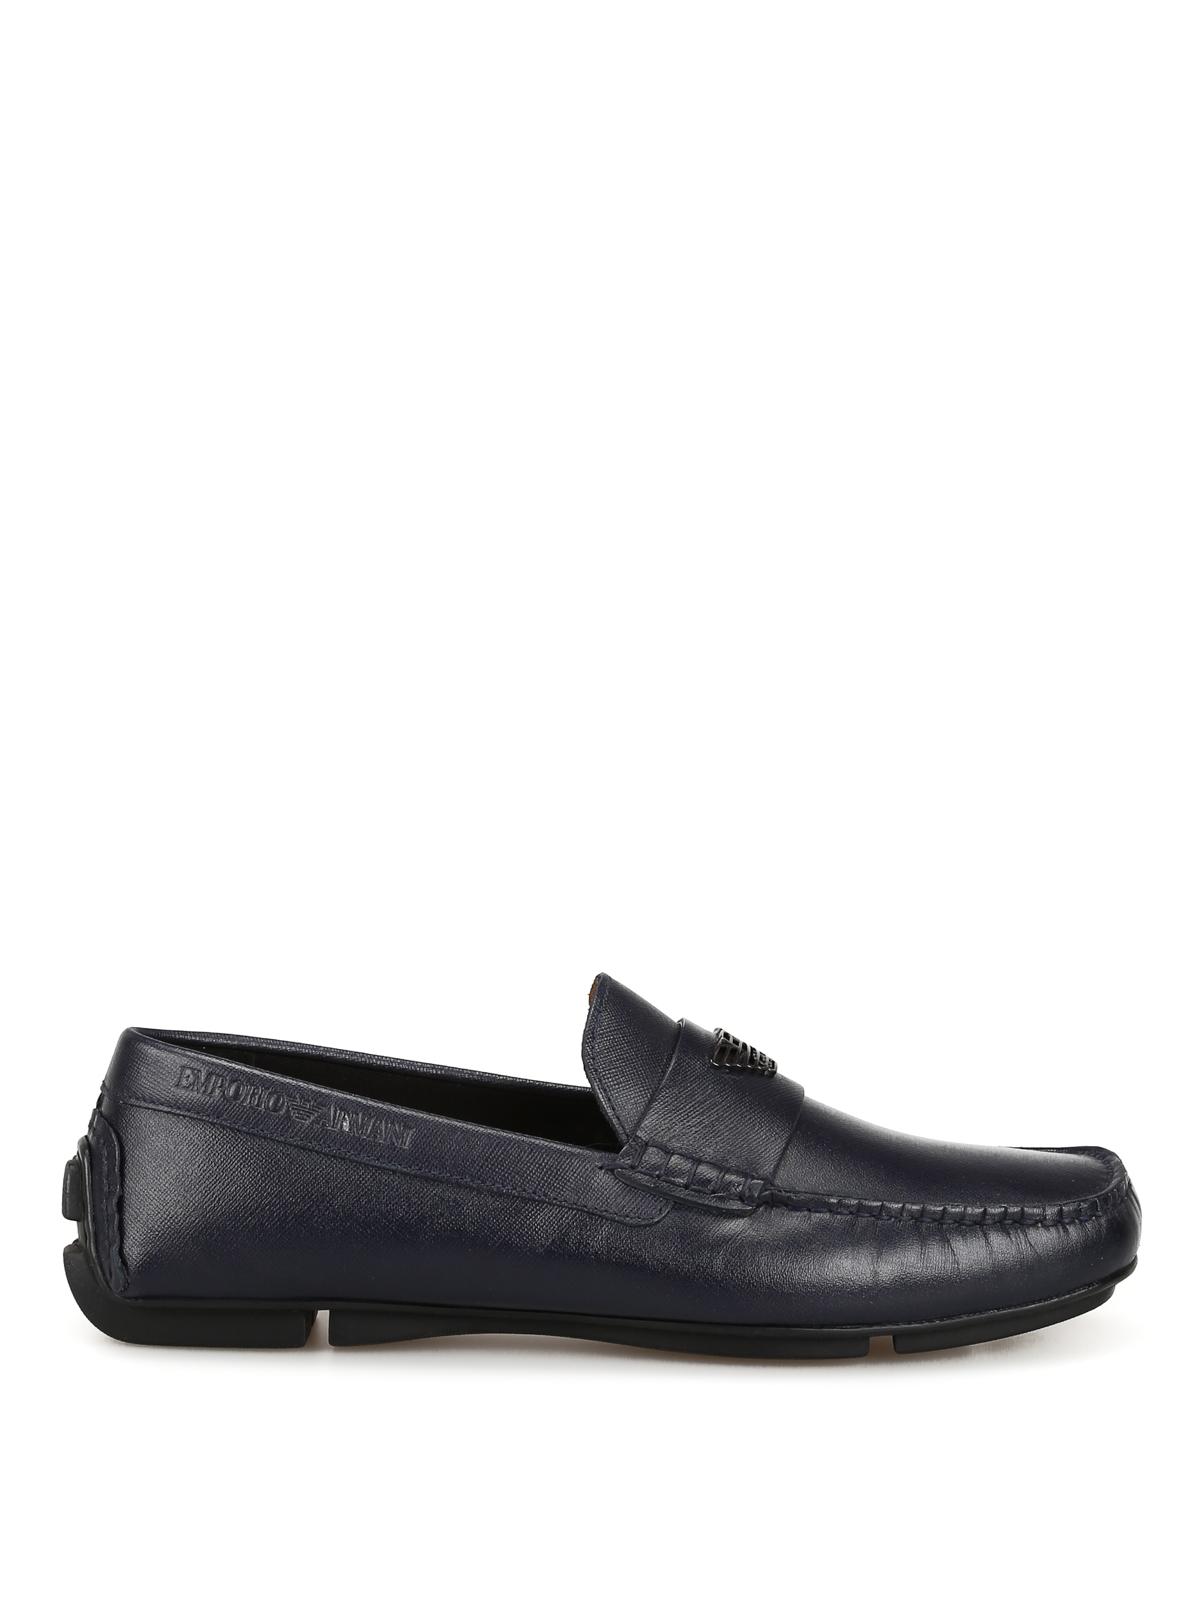 Loafers & Slippers Emporio Armani - Saffiano leather driver loafers ...